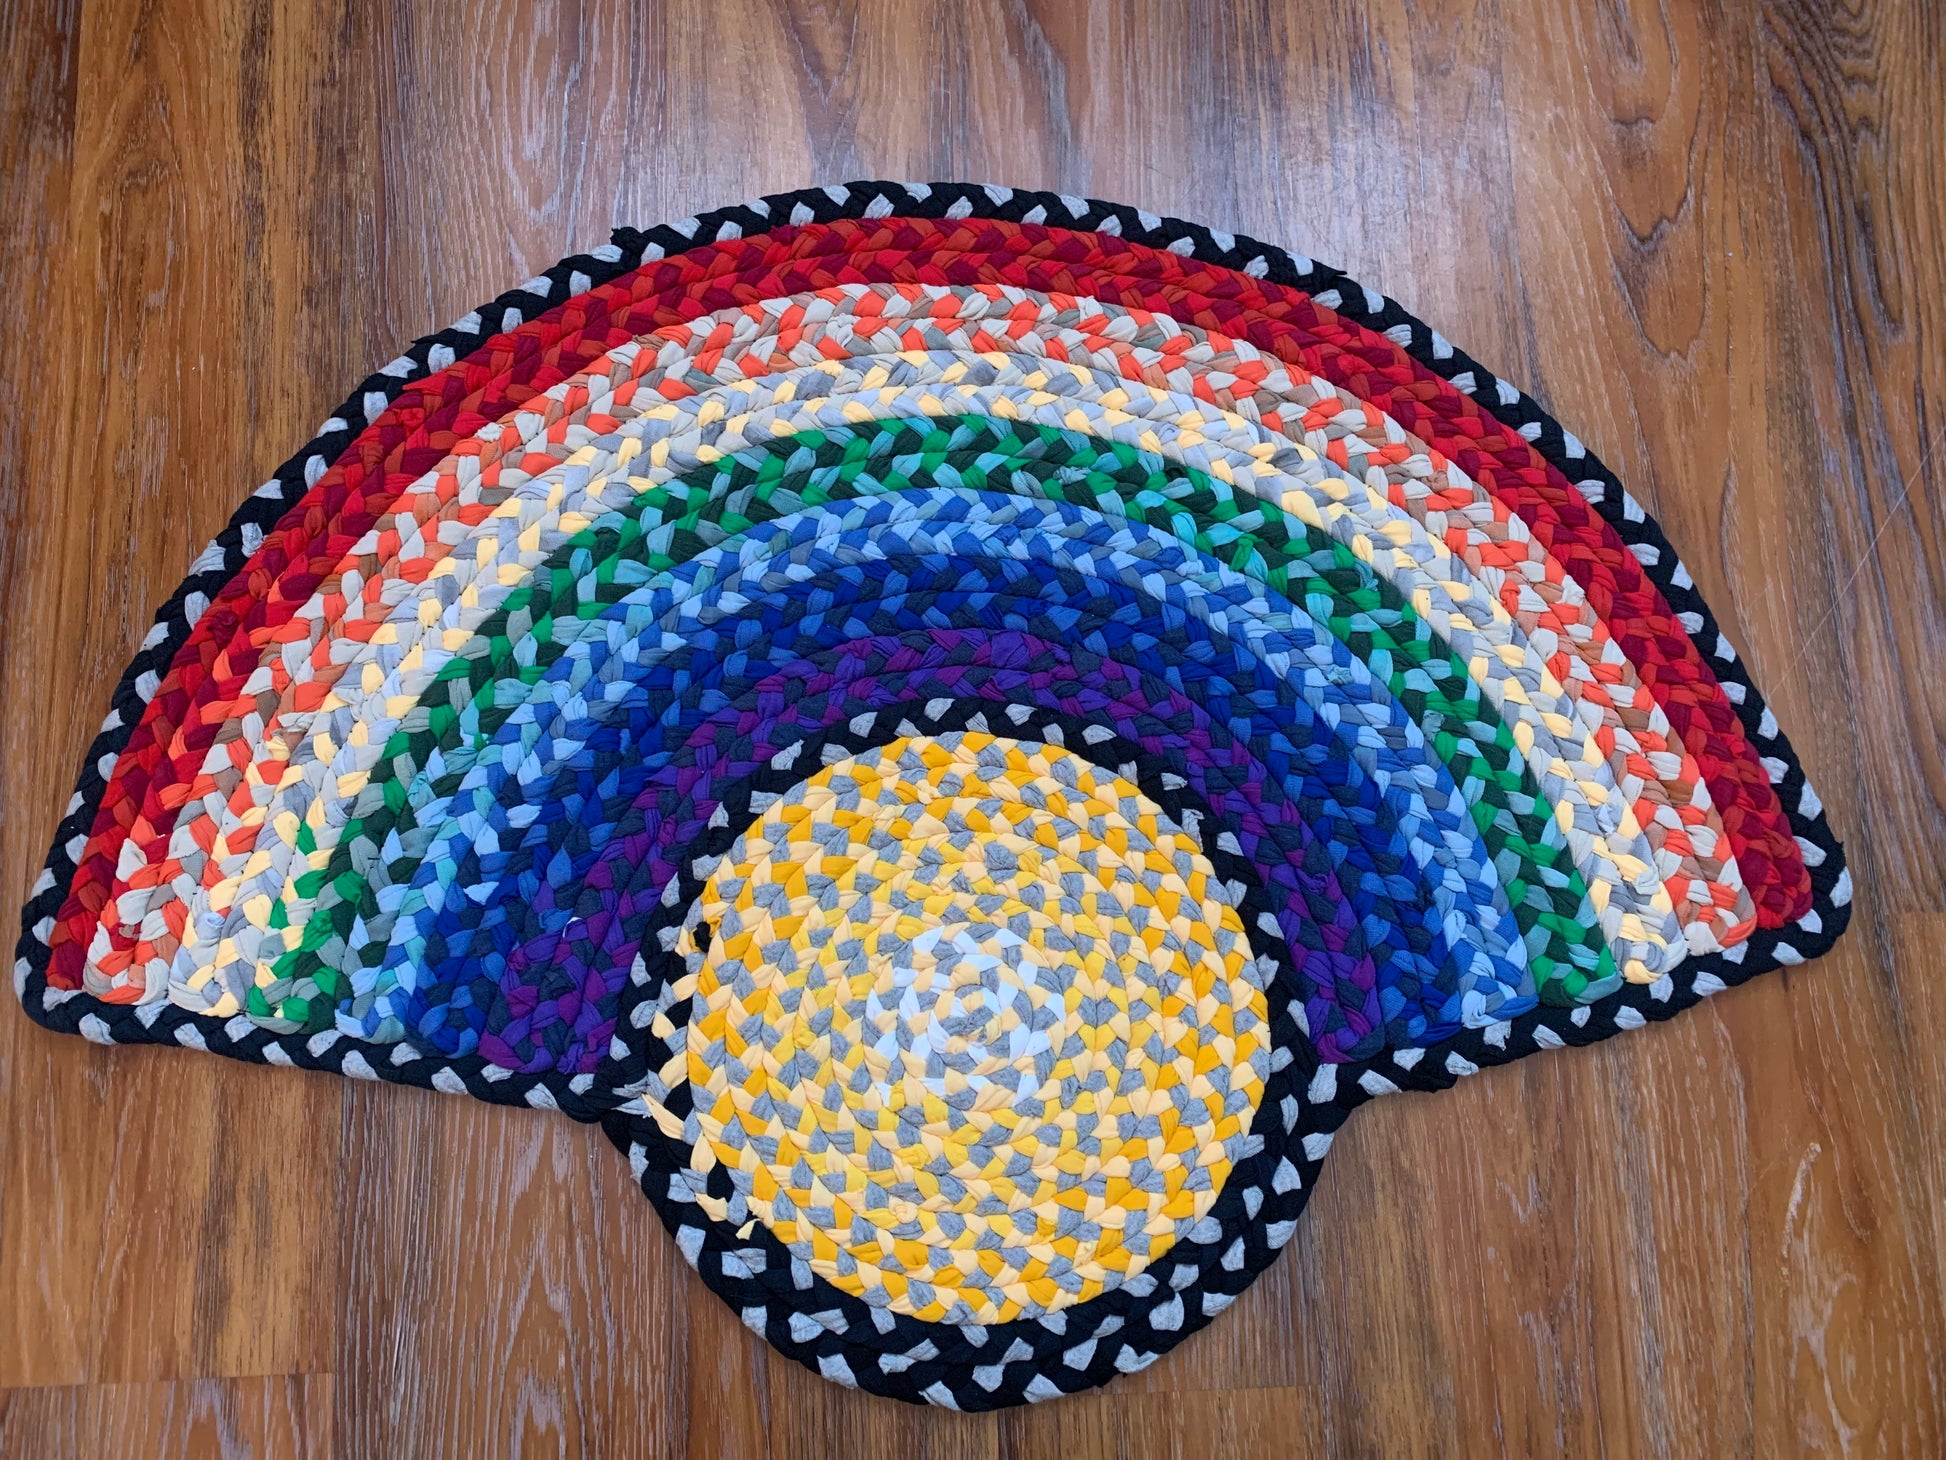 A yellow circle in the middle of the rug denotes the sun, with a rainbow half surrounding the sun, in a typical bow fashion. Red orange yellow green blue indigo and purple.